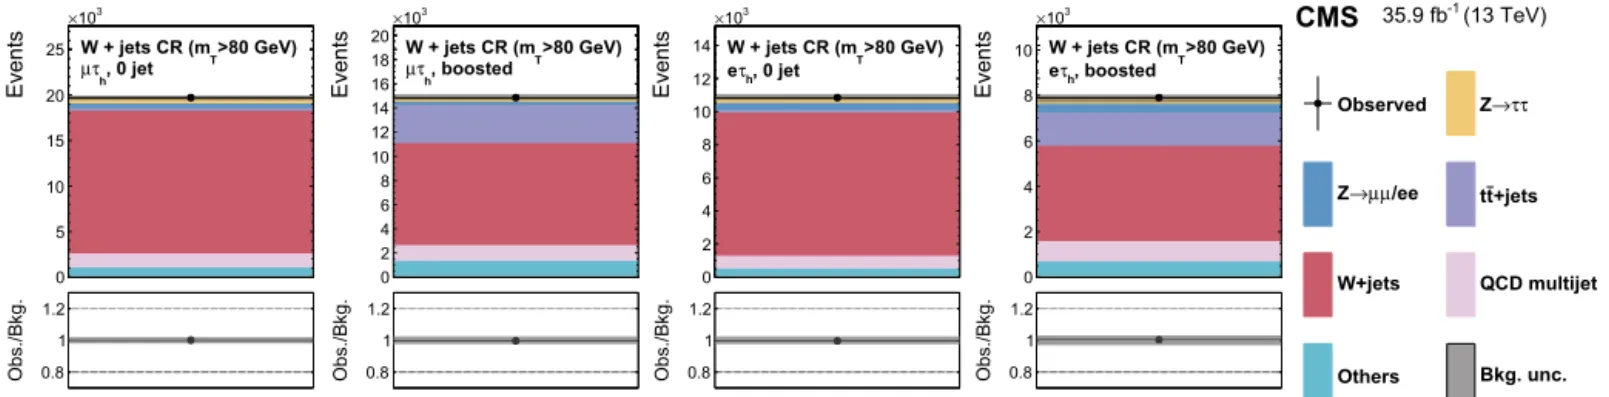 Fig. 2. Control regions enriched in the W + jets background used in the maximum likelihood ﬁt, together with the signal regions, to extract the results